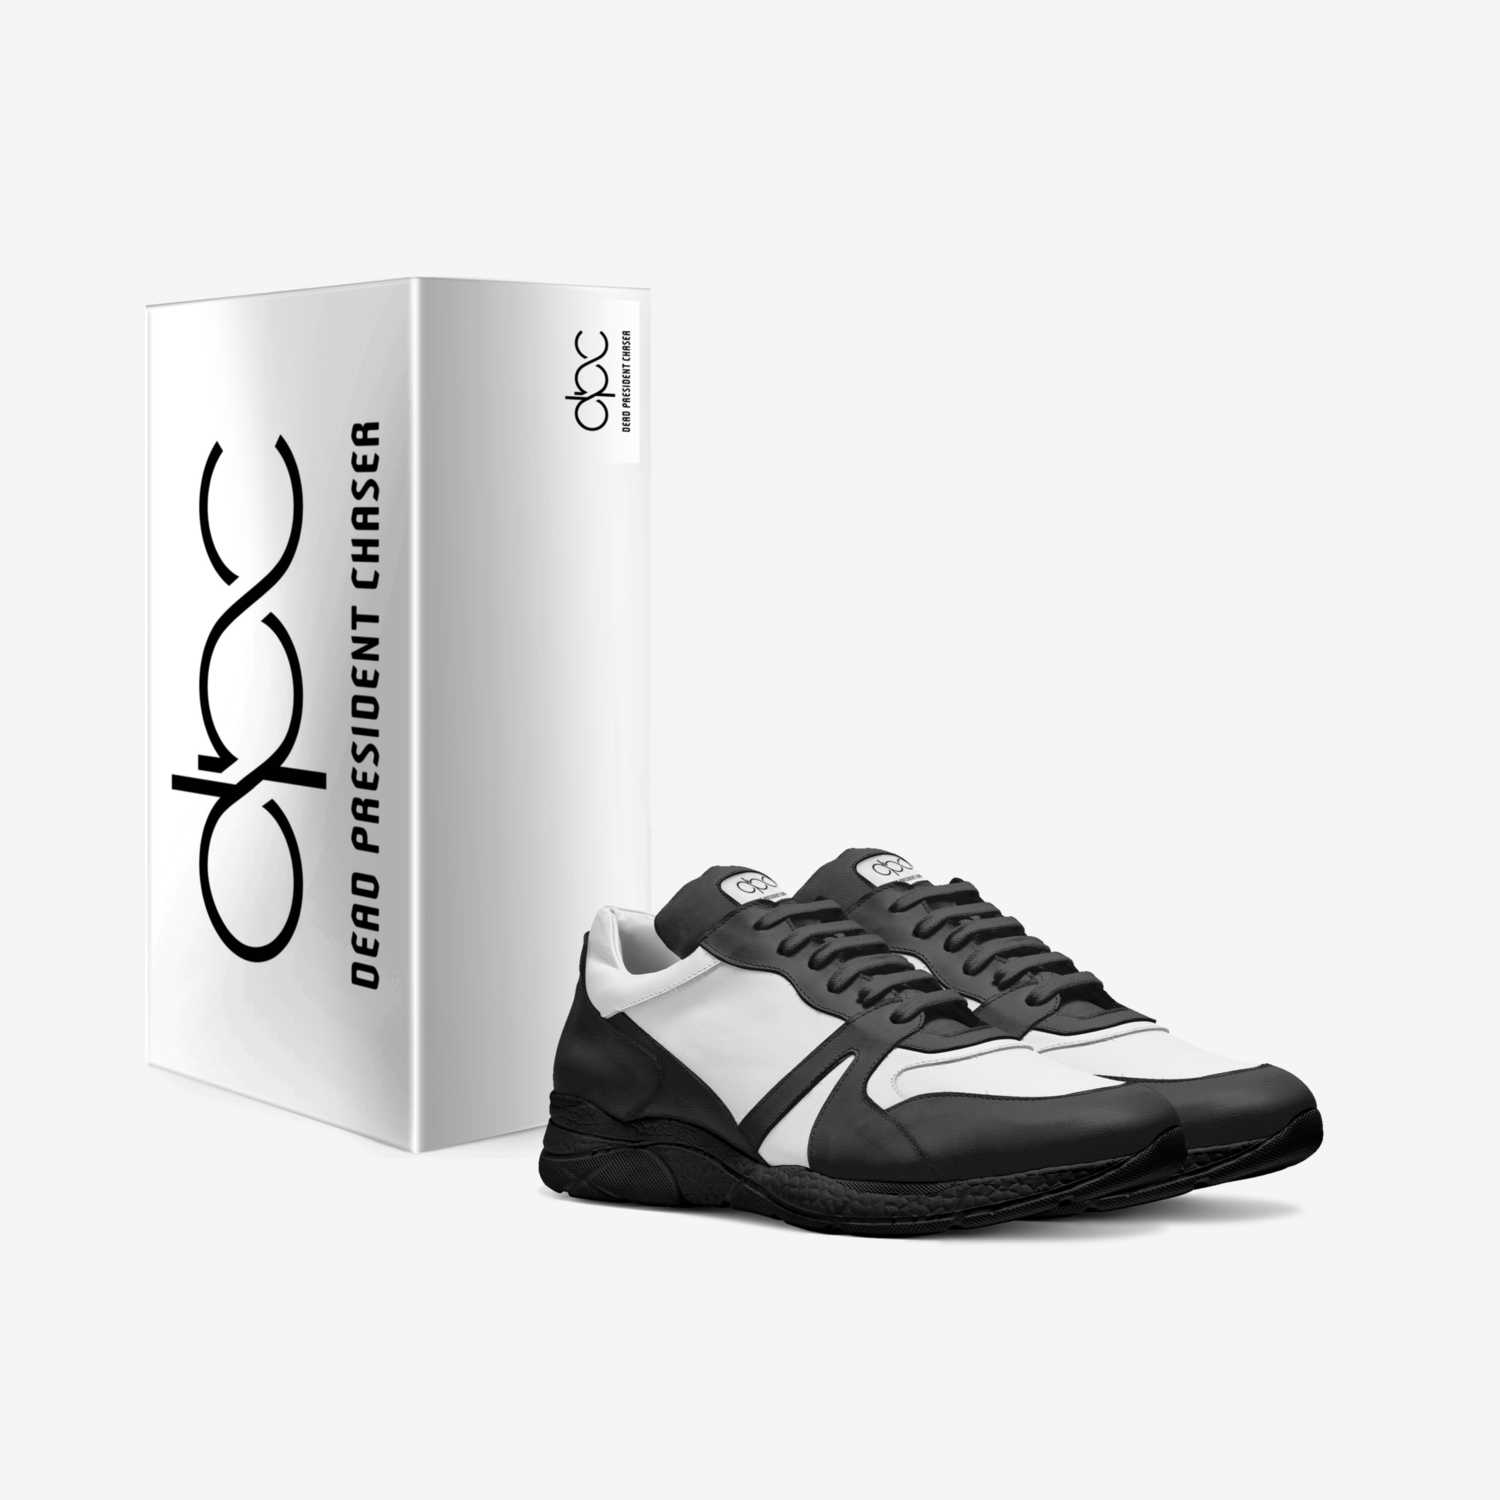 DPCEEZ 10.9 custom made in Italy shoes by Rosny Dumassais | Box view